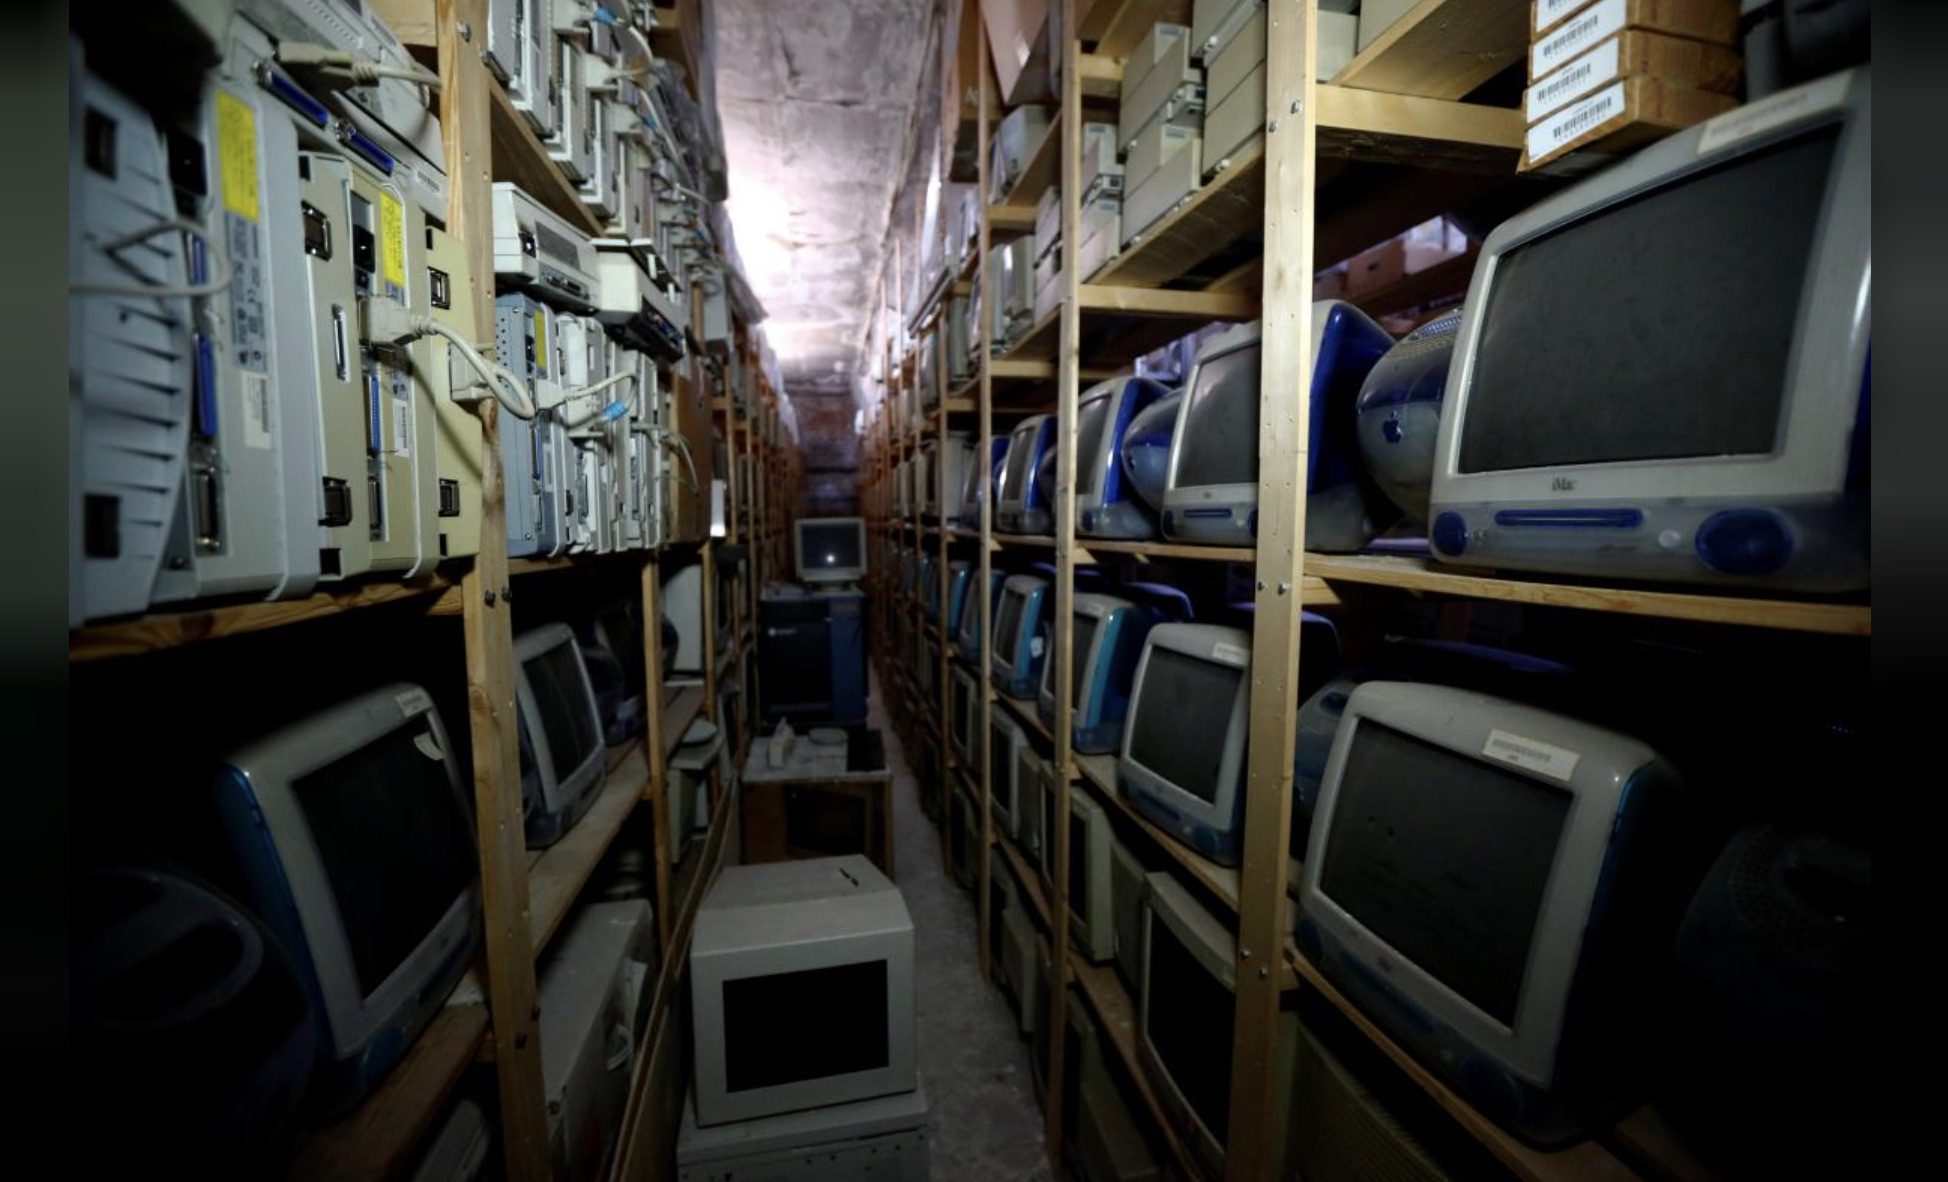 Roland Borsky and the largest collection of Macs in the world, in Vienna